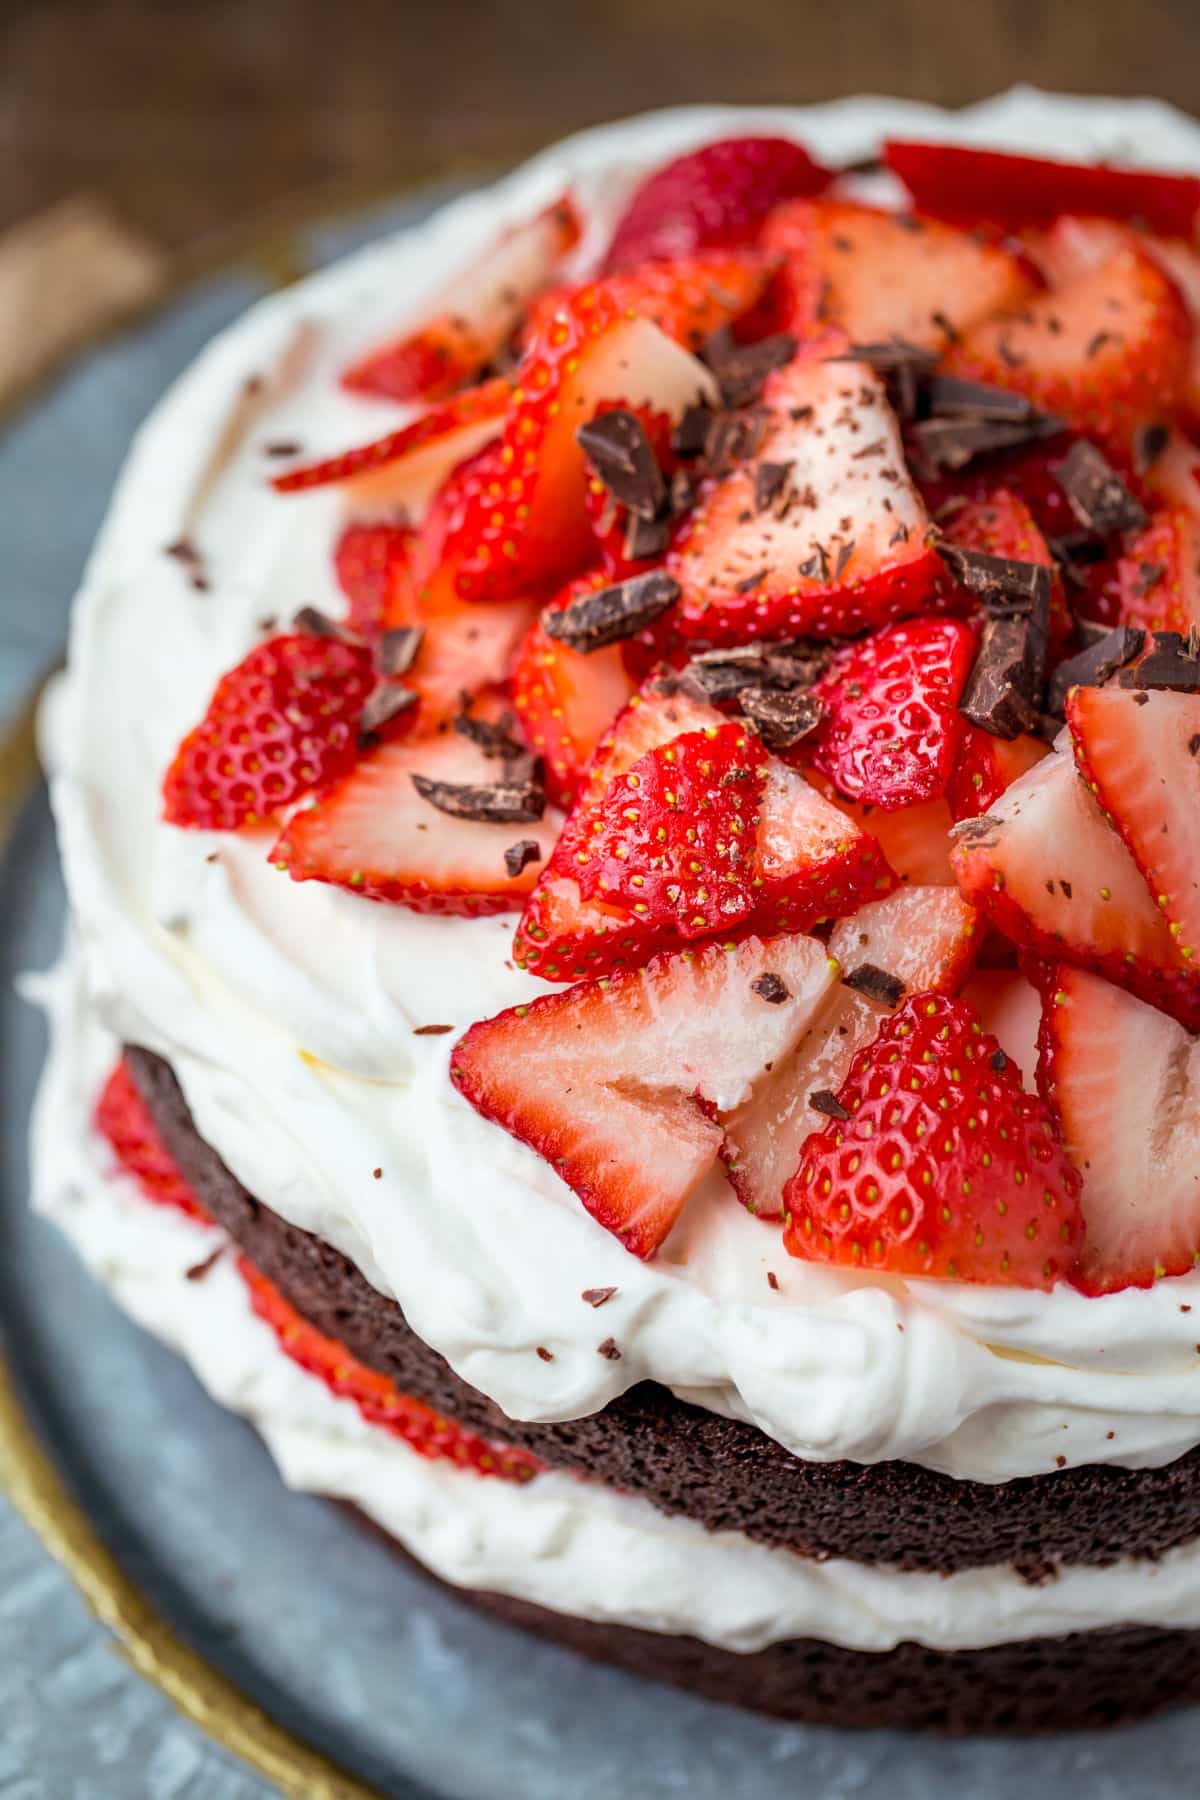 Strawberries and cream chocolate cake on a platter with plates and silverware in the background.